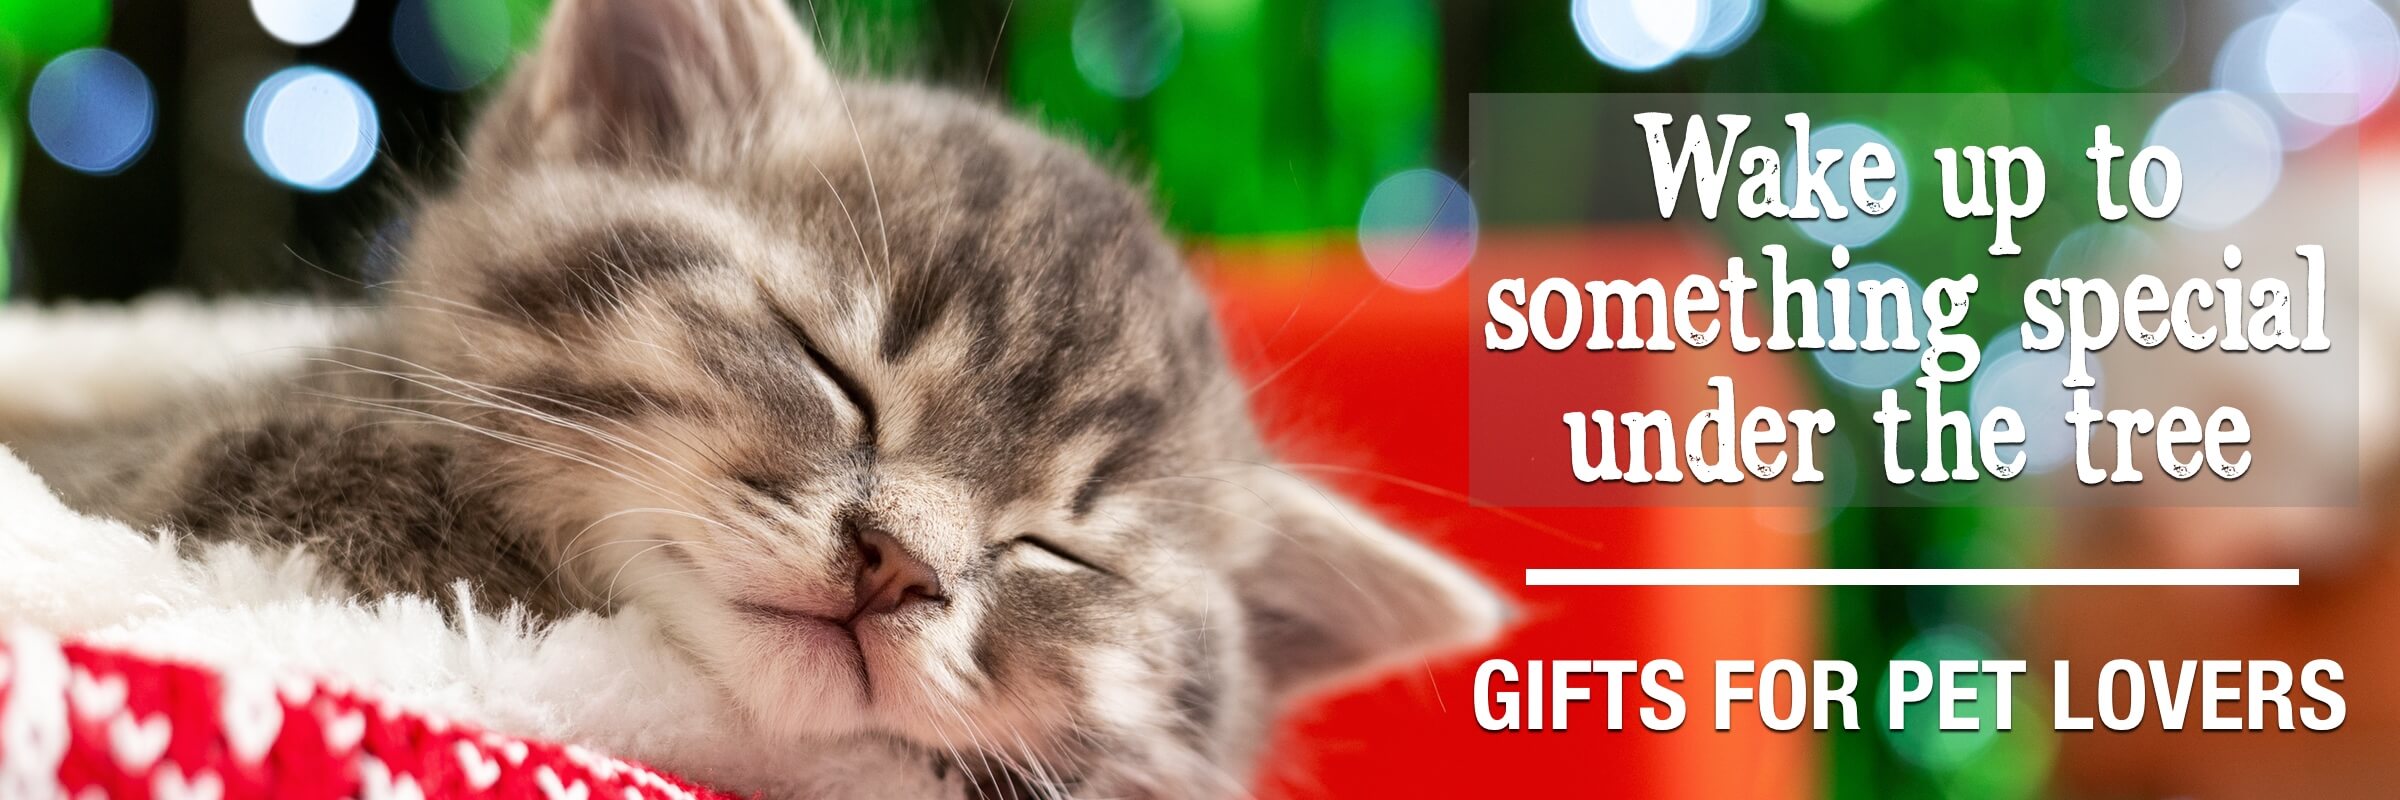 Image of sleepy kitten Wake up to something special under the tree Gifts for pet lovers